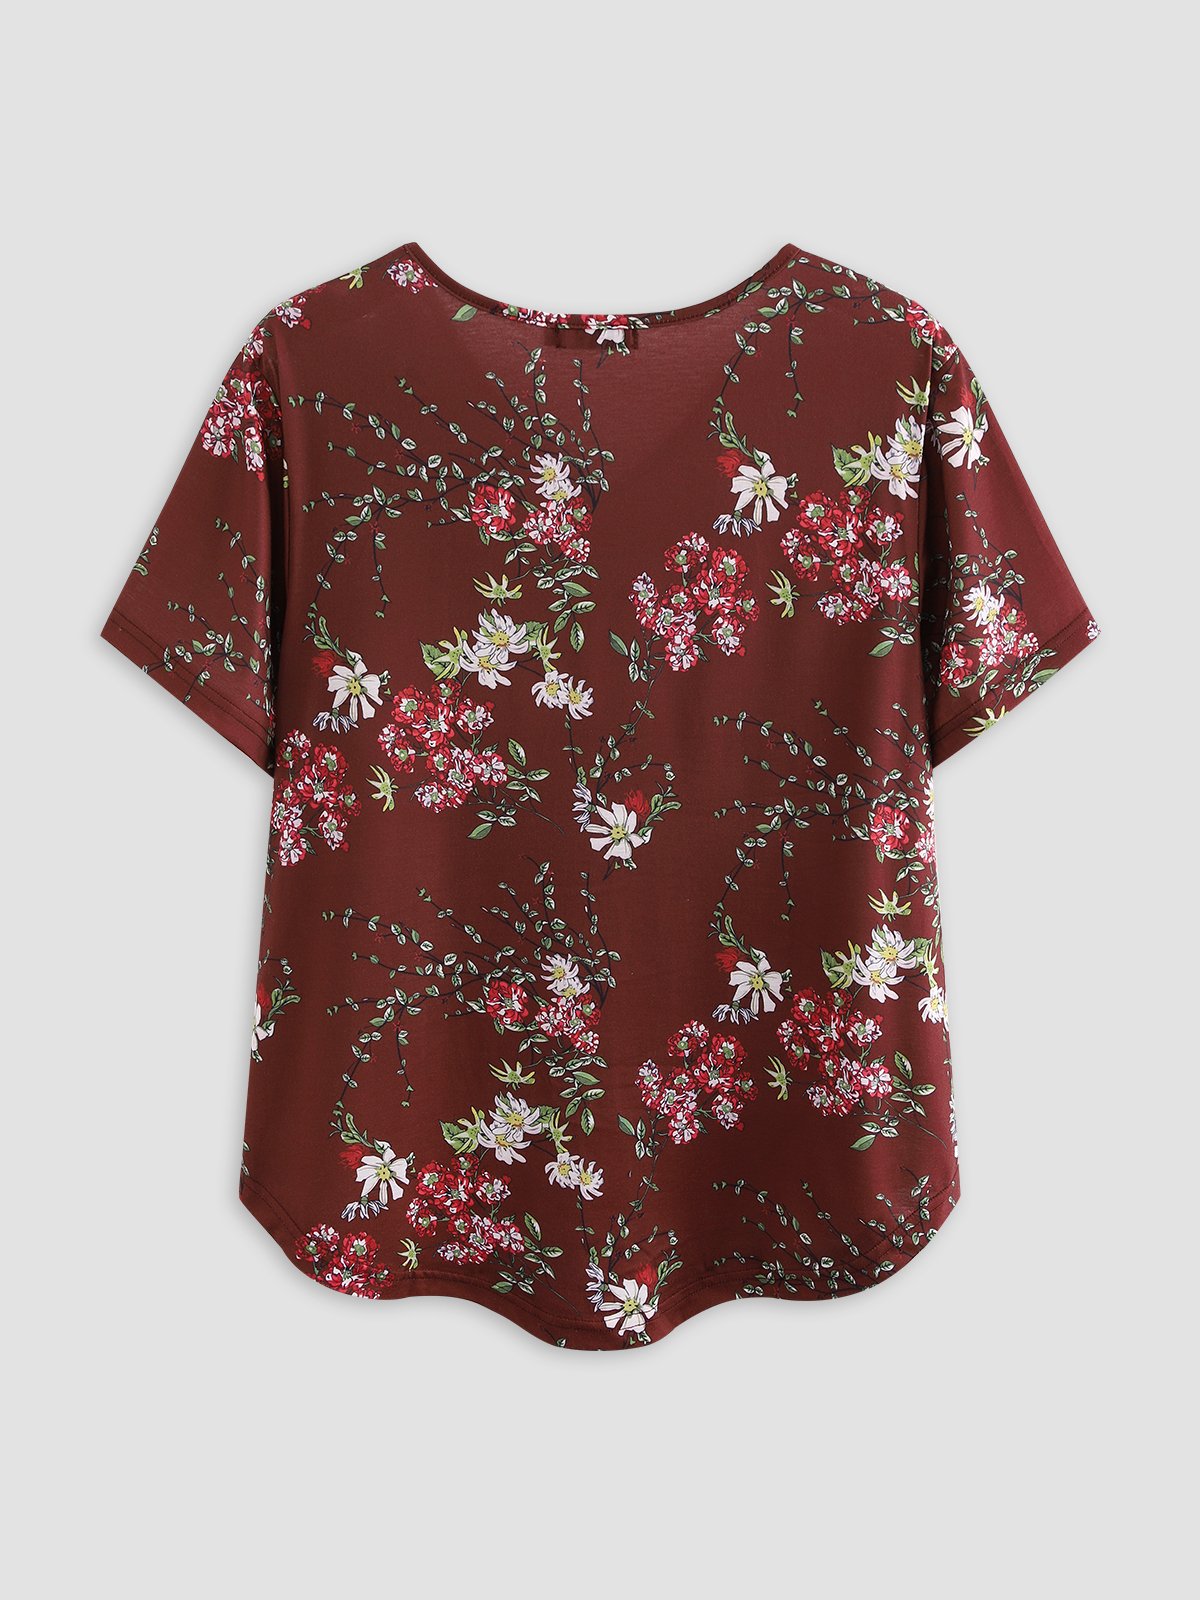 Women's Plus Size L-6XL Floral Tops V Neck T-Shirts Short Sleeve Casual Tees